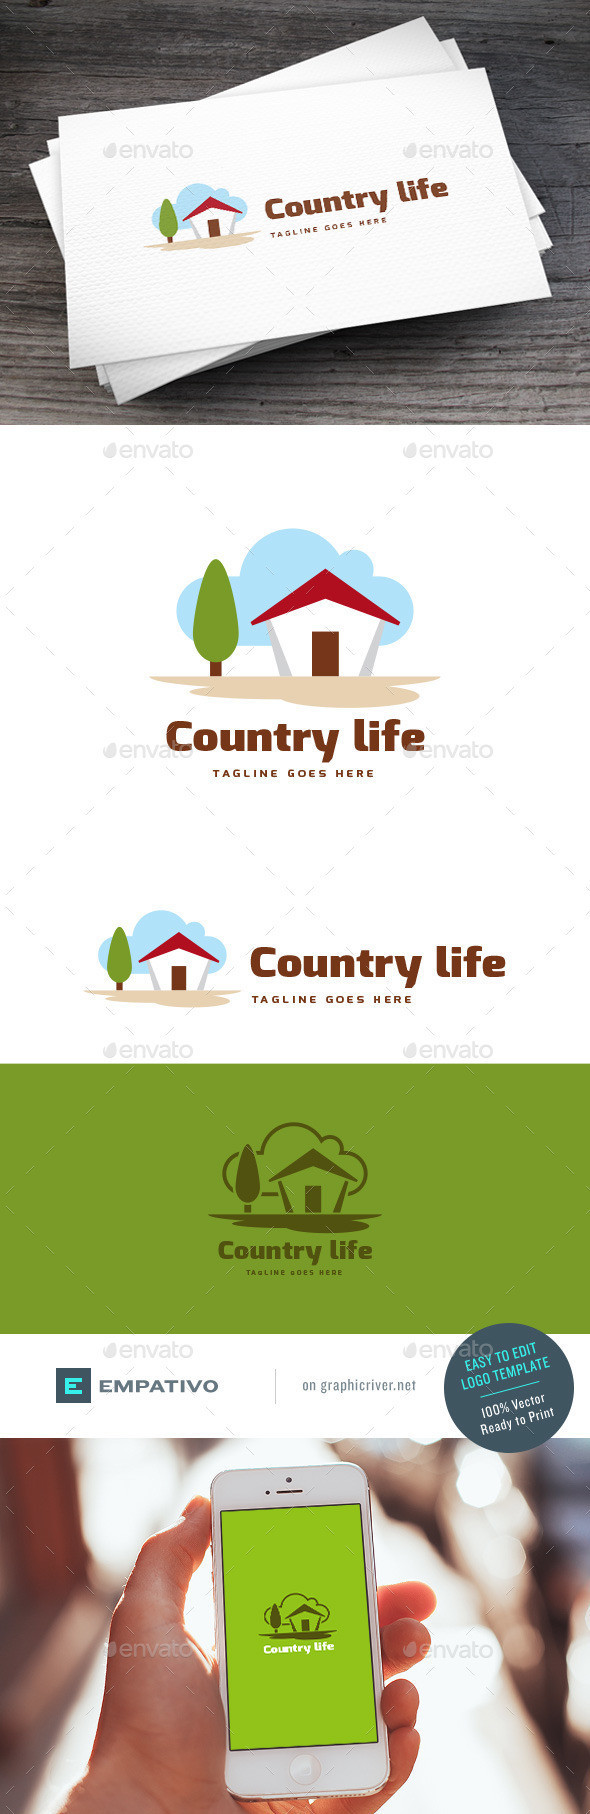 Country life logo template